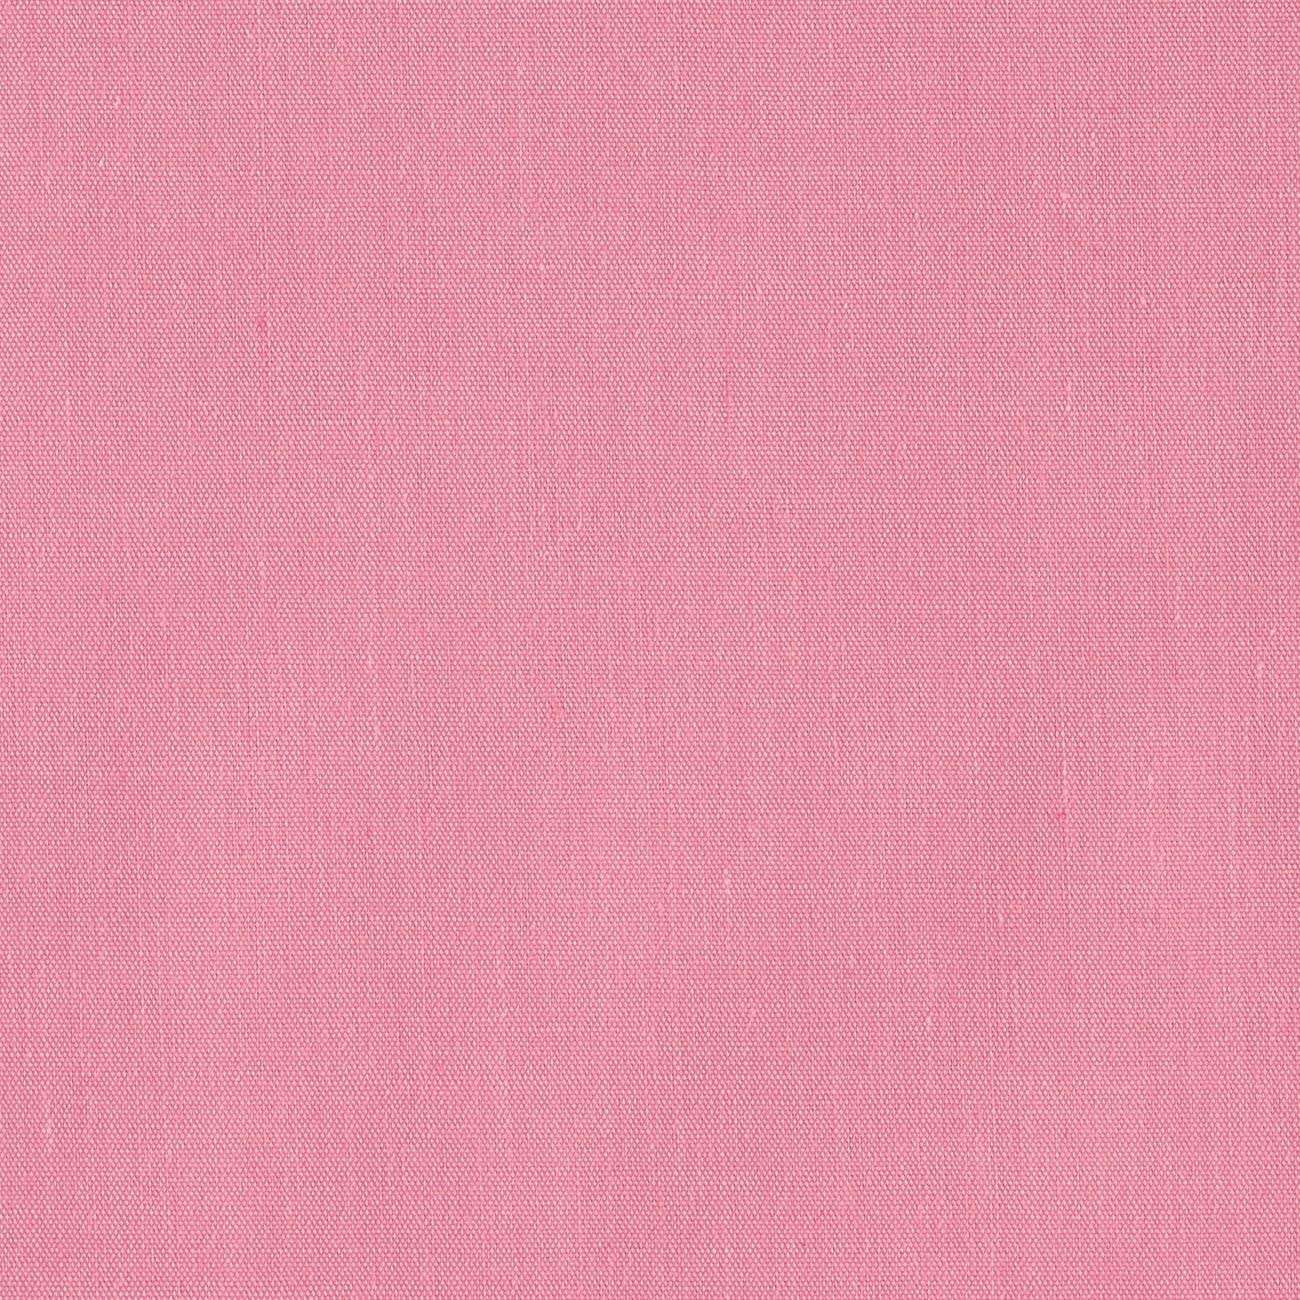 Premium Light Weight Poly Cotton Blend Broadcloth Fabric, Good to Make Face Mask Fabric (Candy Pink, 1 Yard)